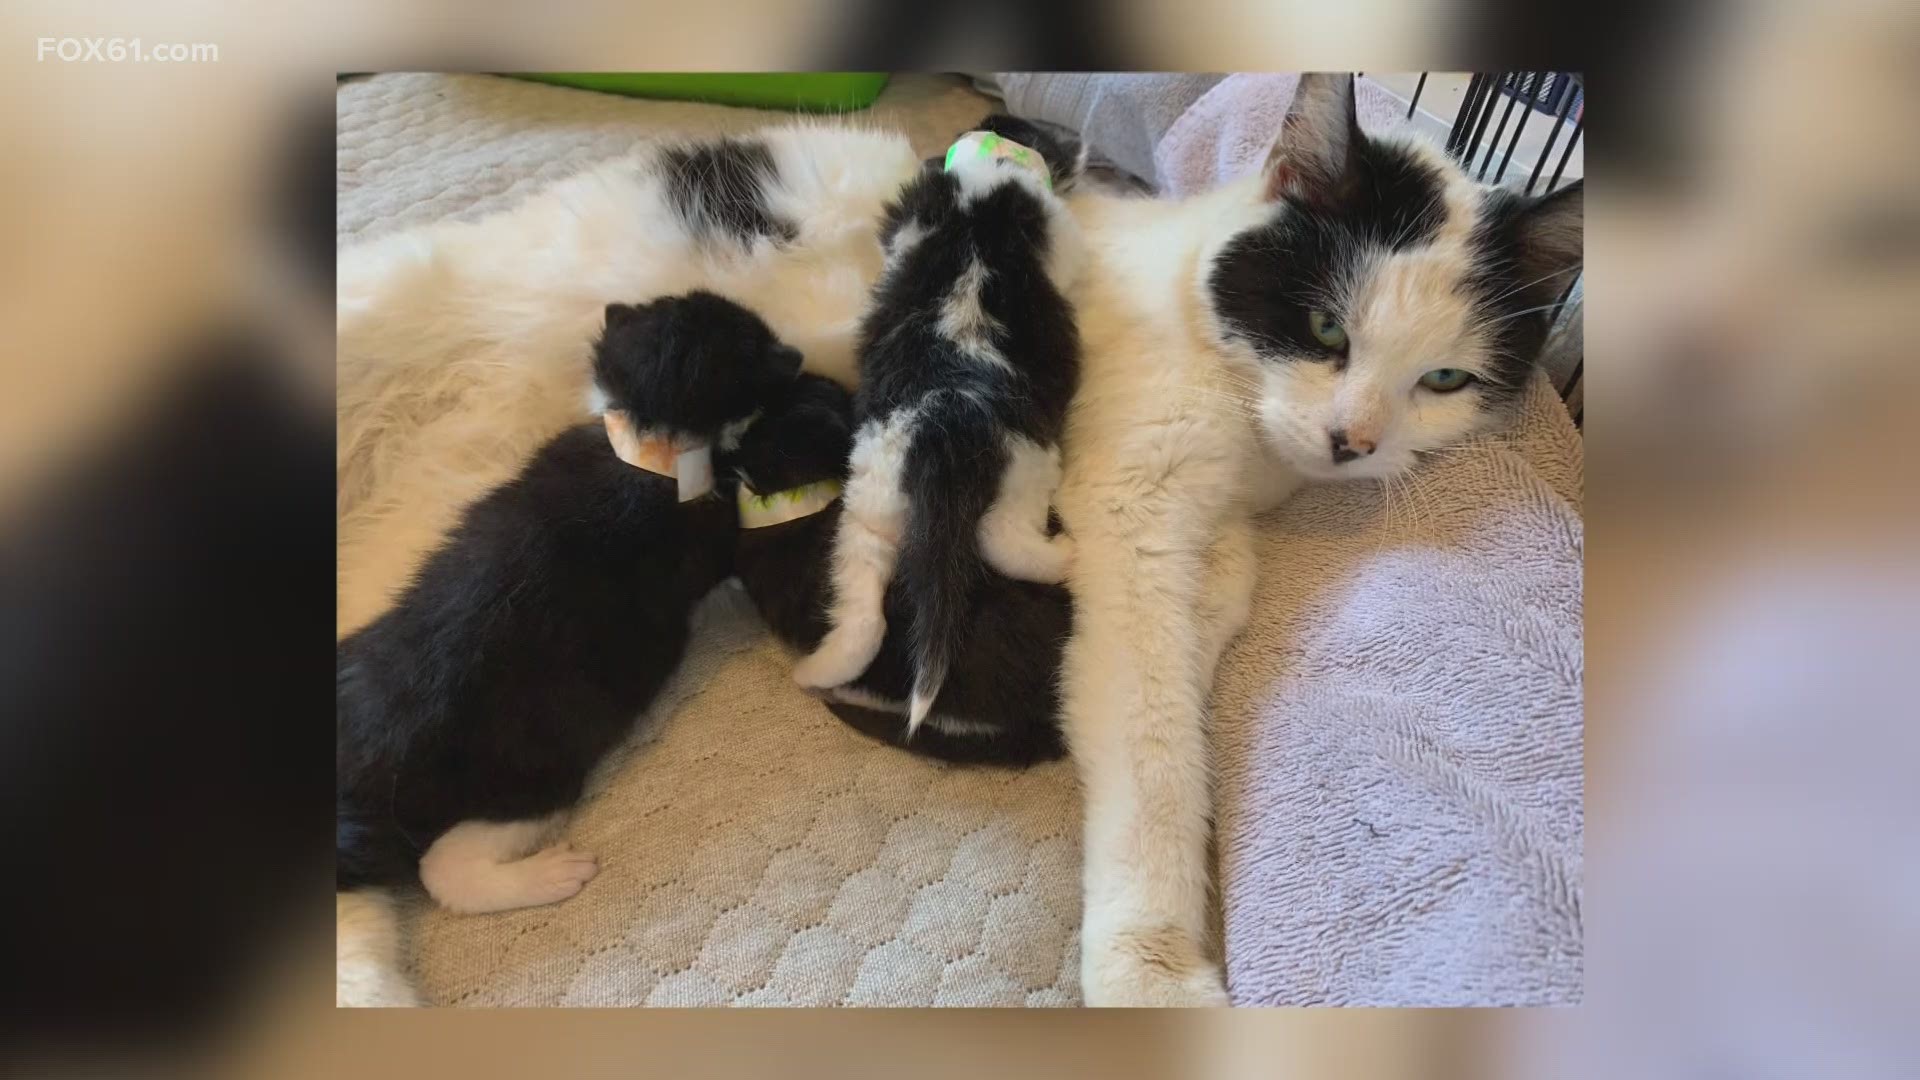 The Dan Cosgrove Animal Shelter has said one of the four kittens has died. It is unknown what town the cats were found in.